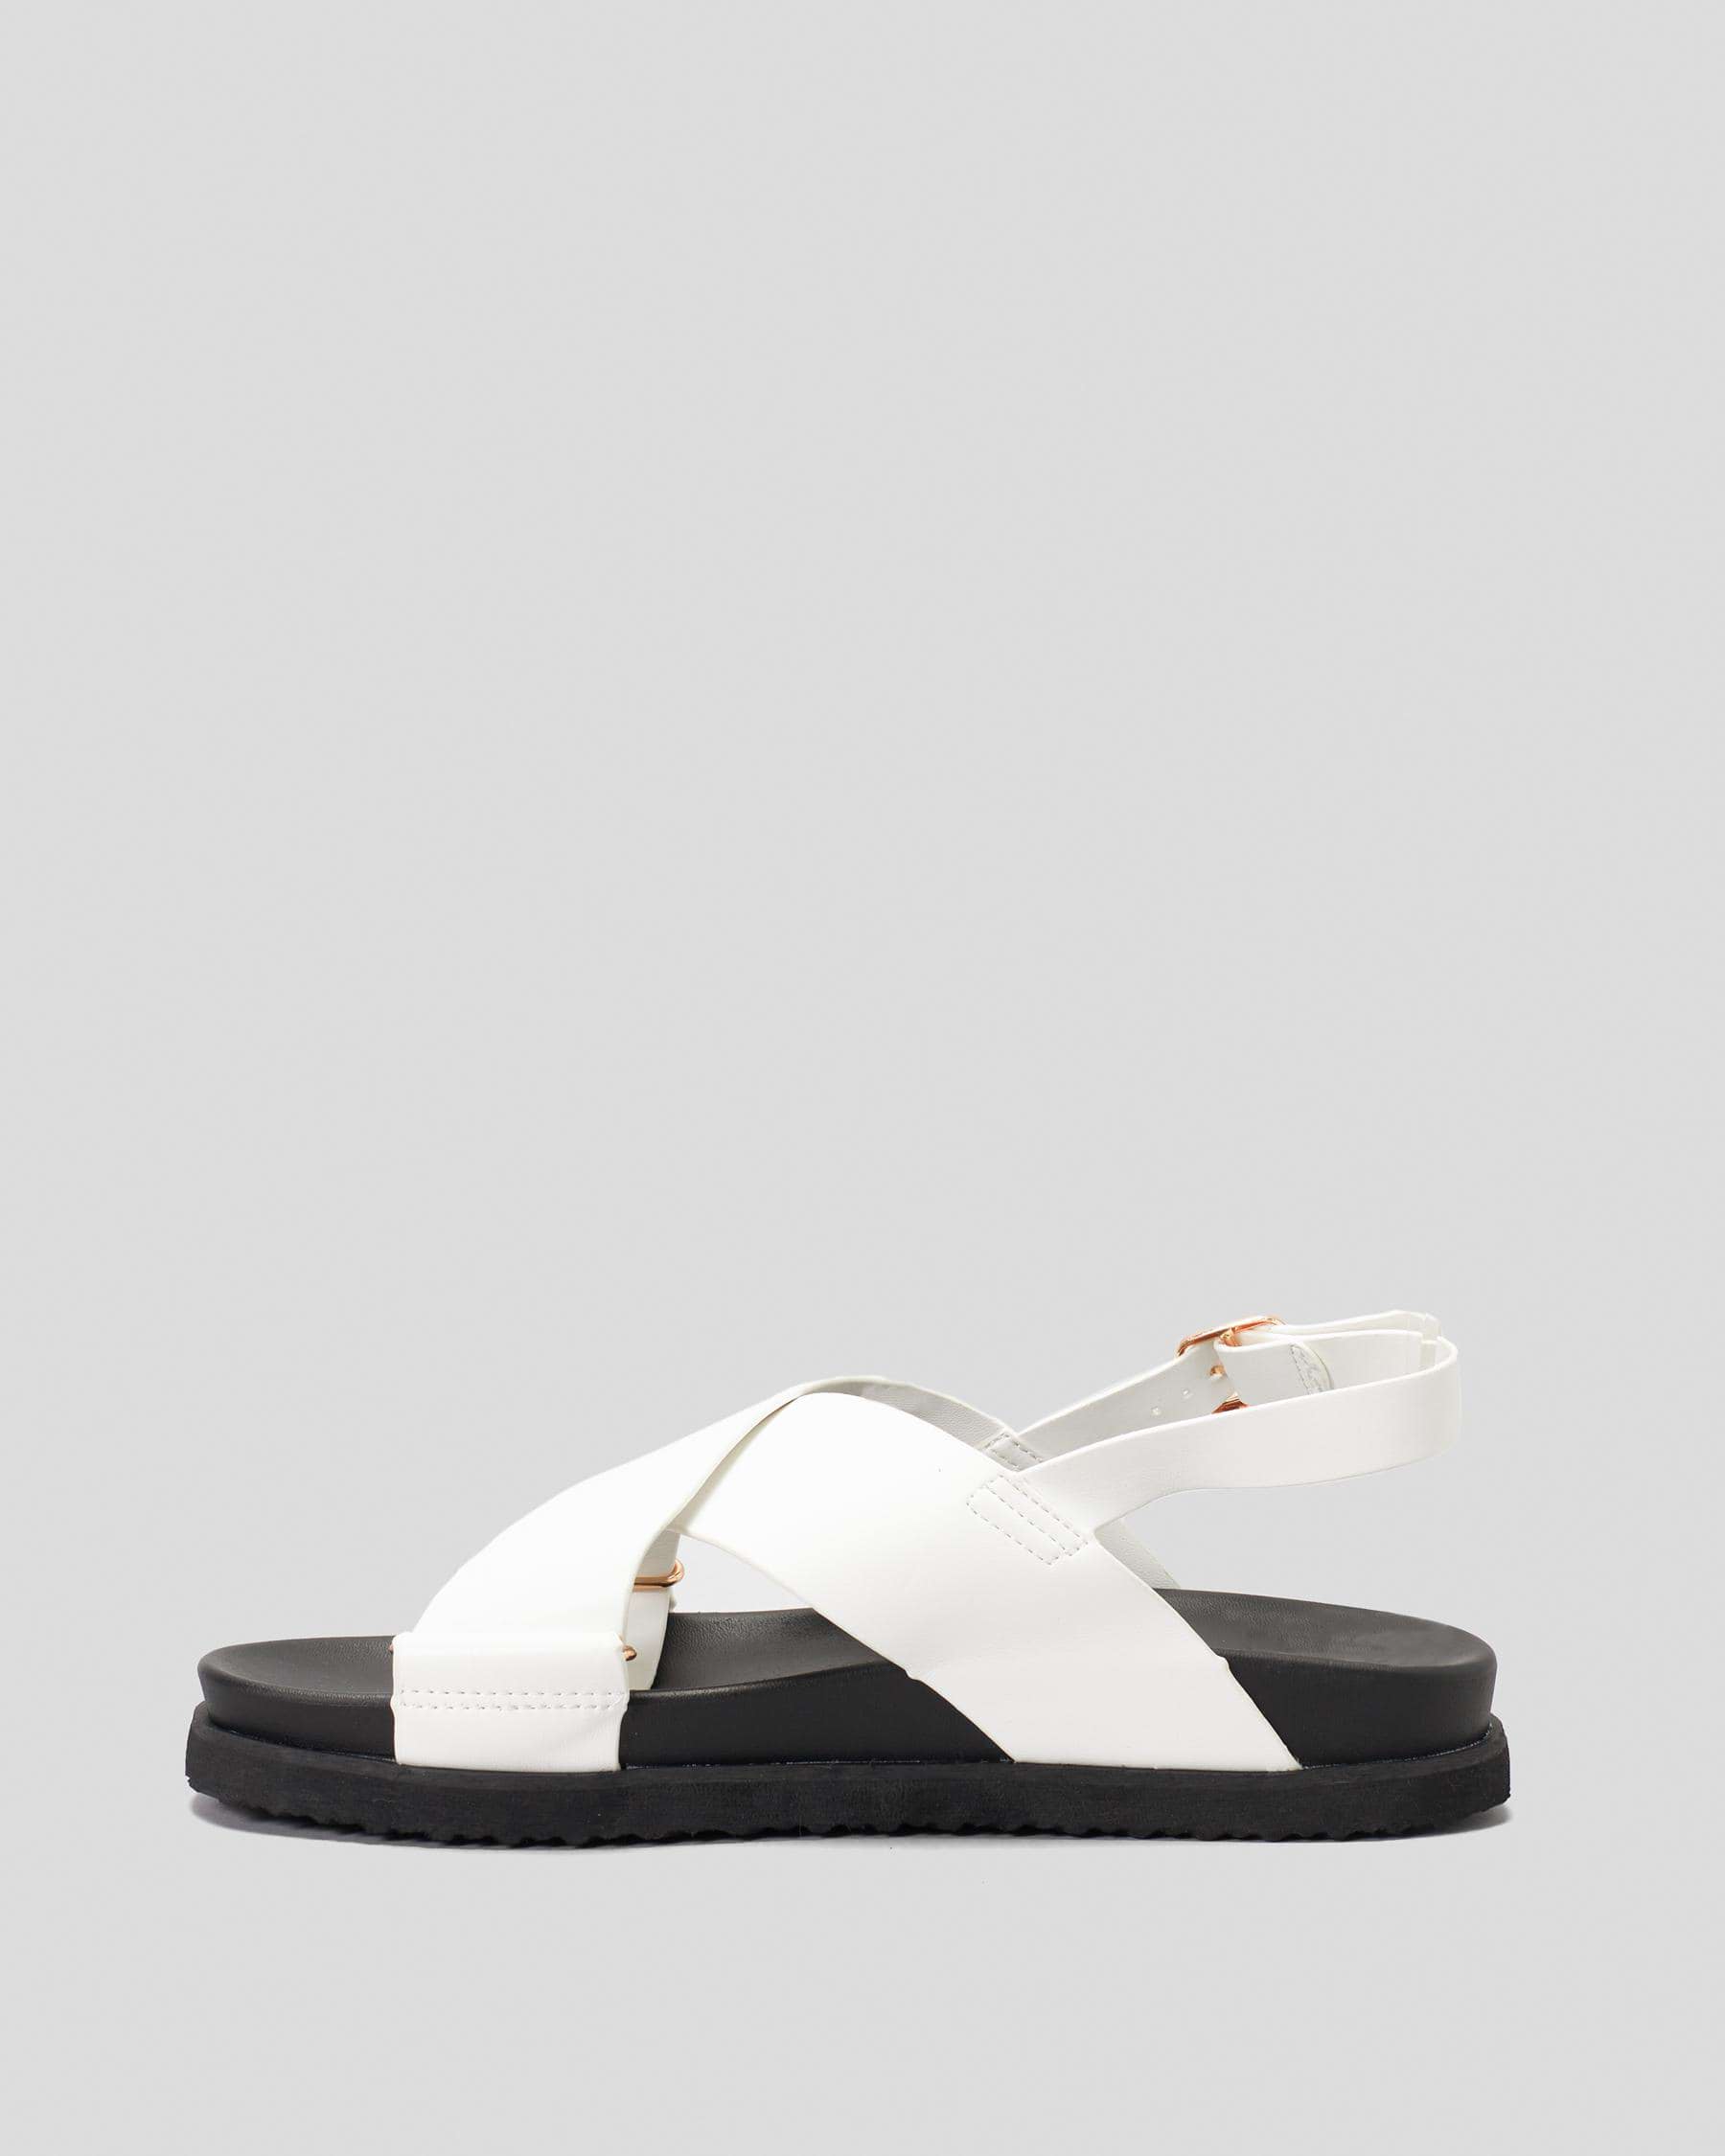 Ava And Ever Myra Sandals In White/black - Fast Shipping & Easy Returns ...